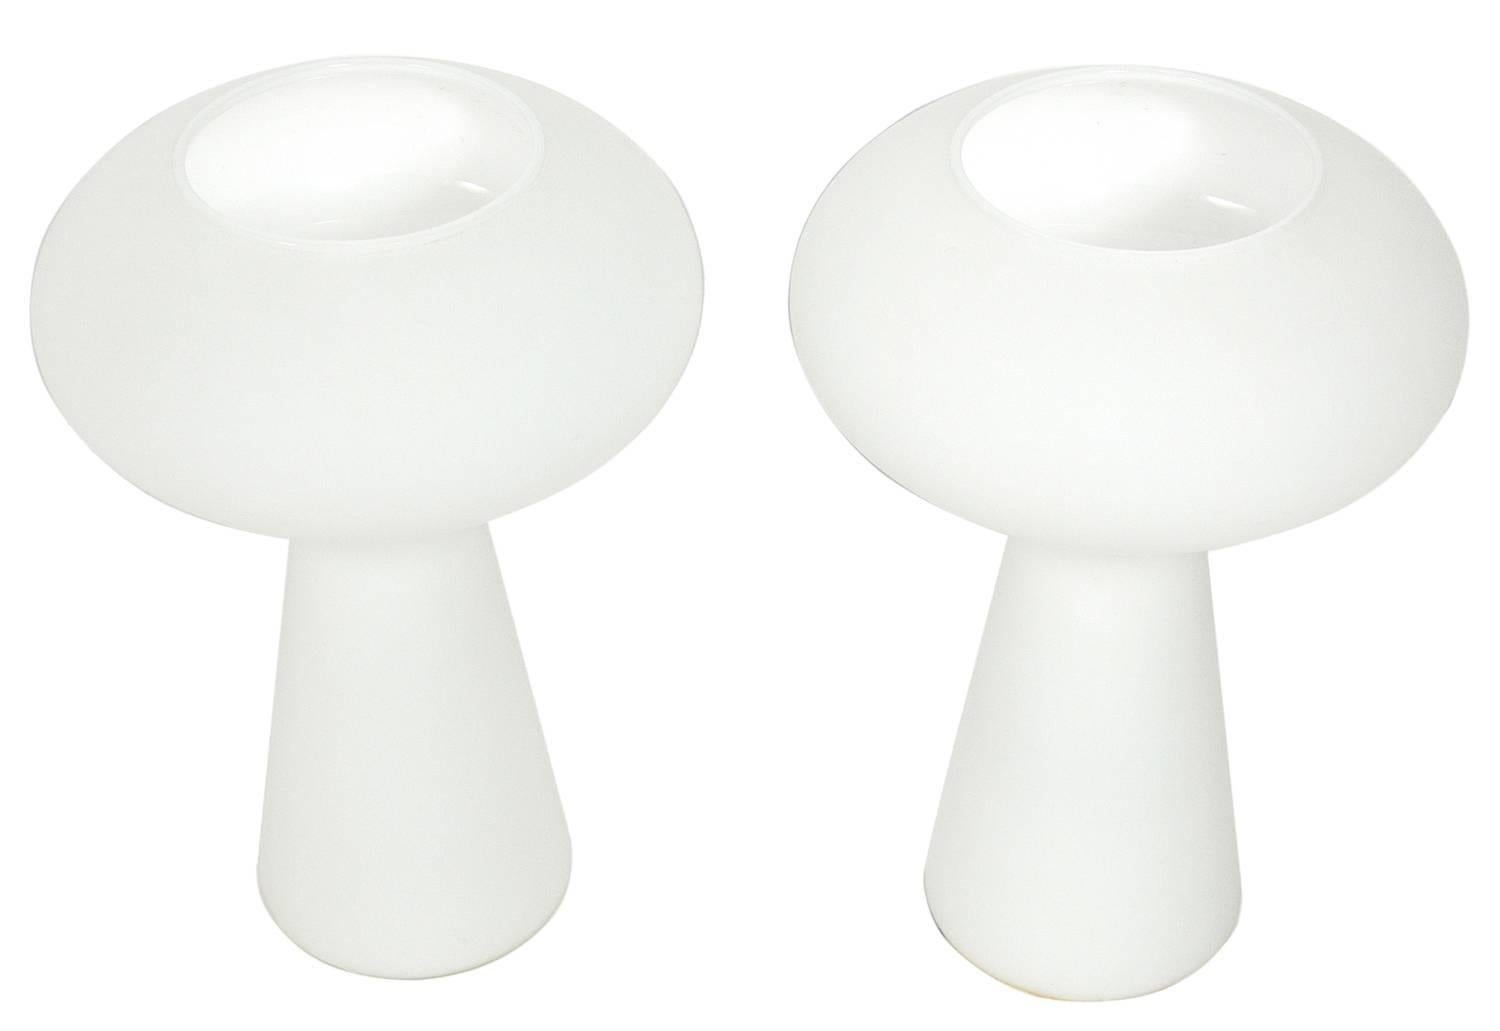 Pair of sculptural white glass lamps by Lisa Johansson-Pape, Sweden, circa 1960s. They emit a warm glow when lit. The price noted below is for the pair of lamps.